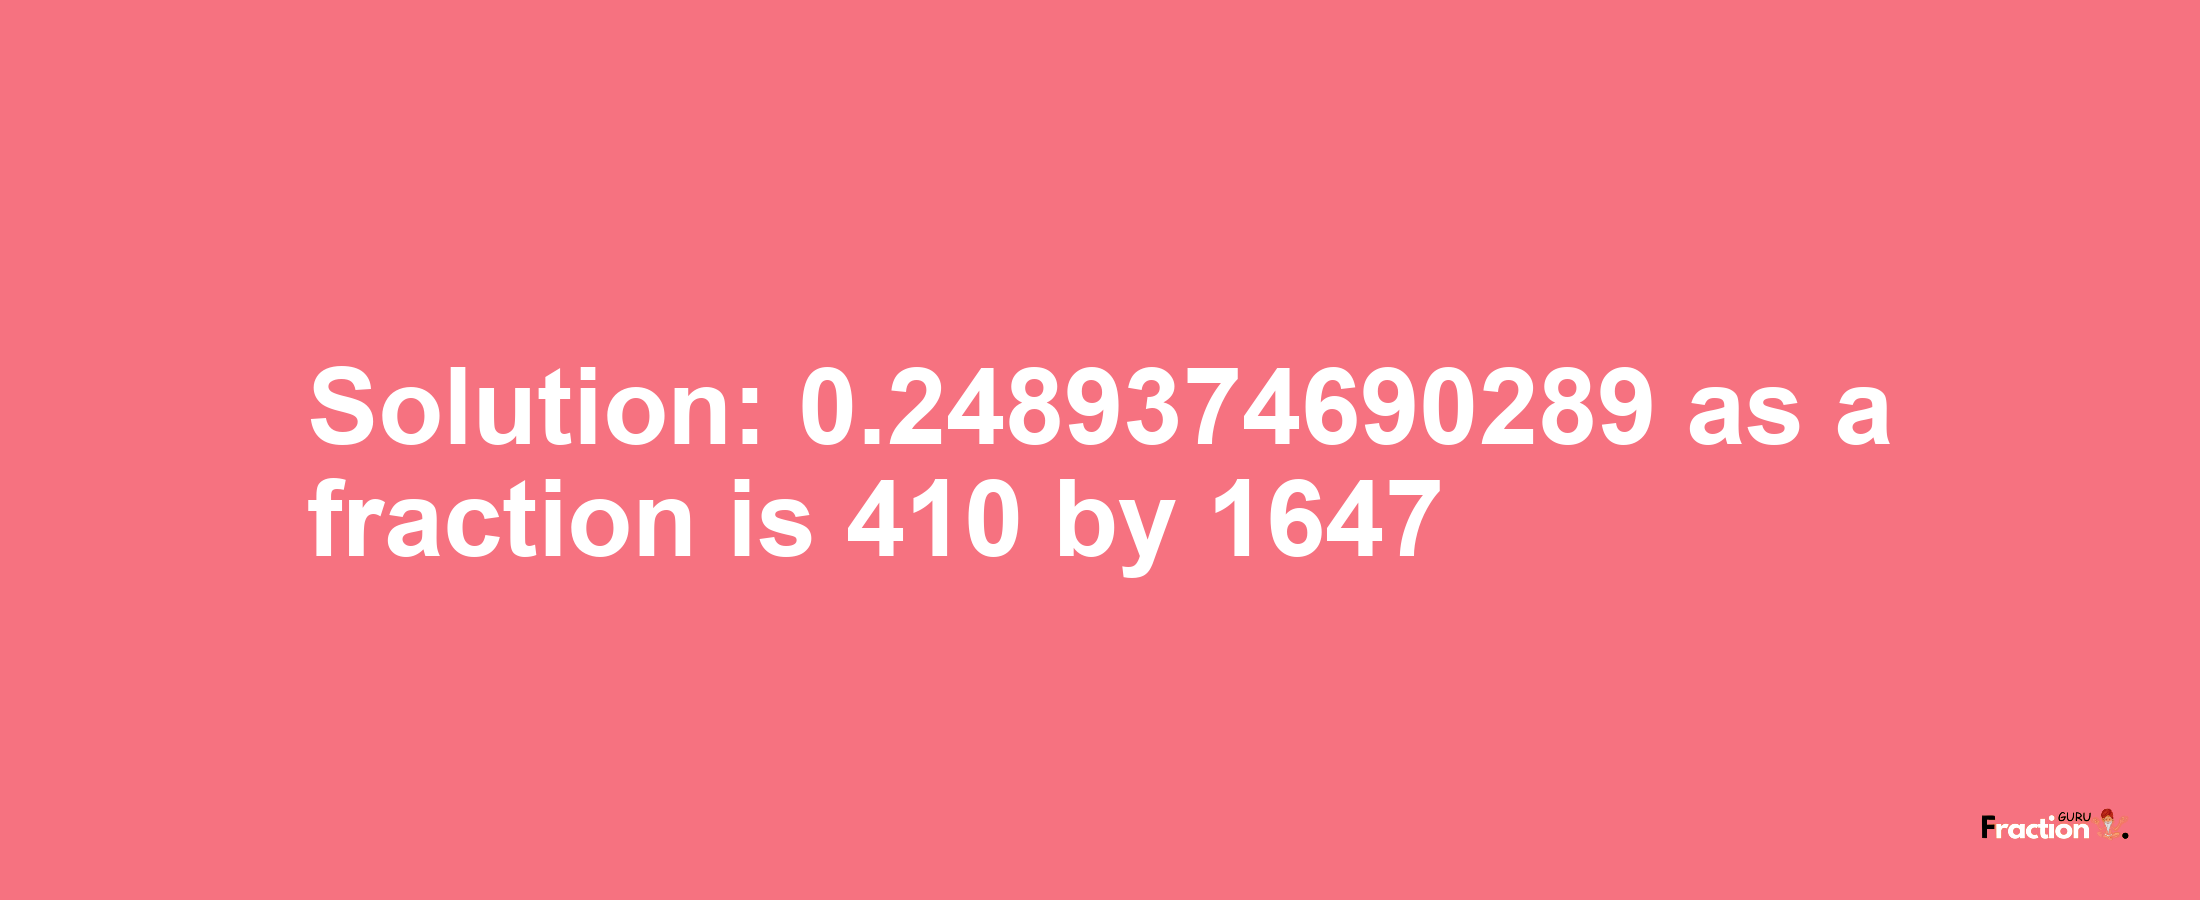 Solution:0.2489374690289 as a fraction is 410/1647